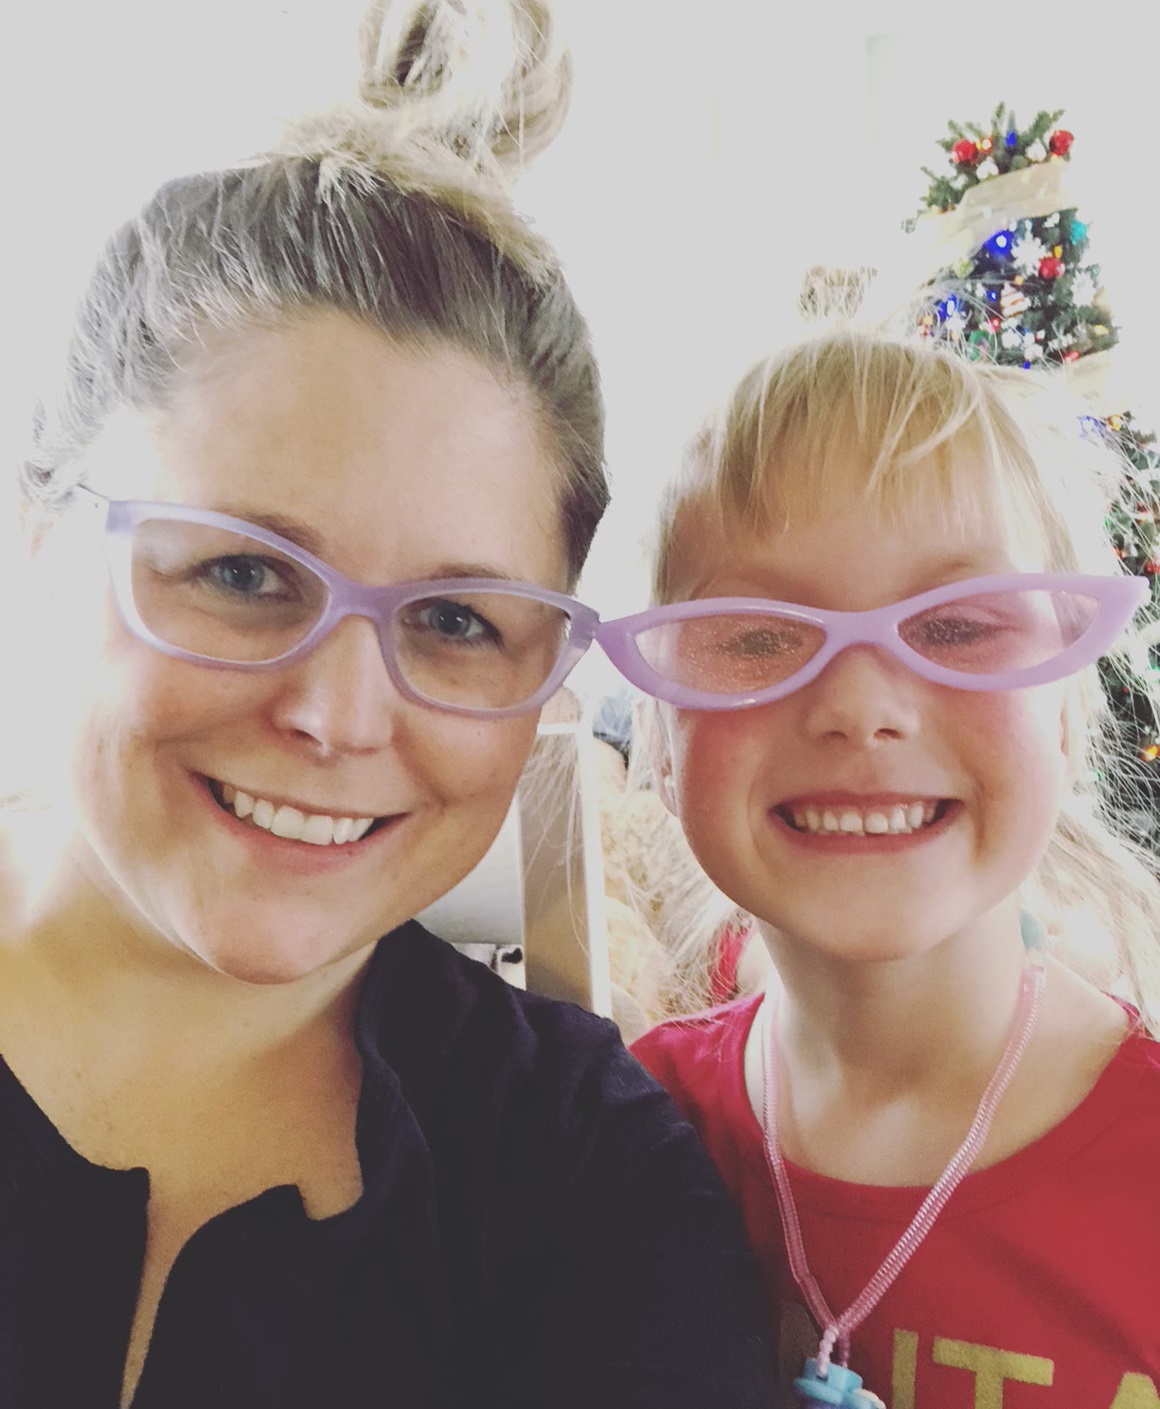 woman and young girl, smiling and wearing matching glasses